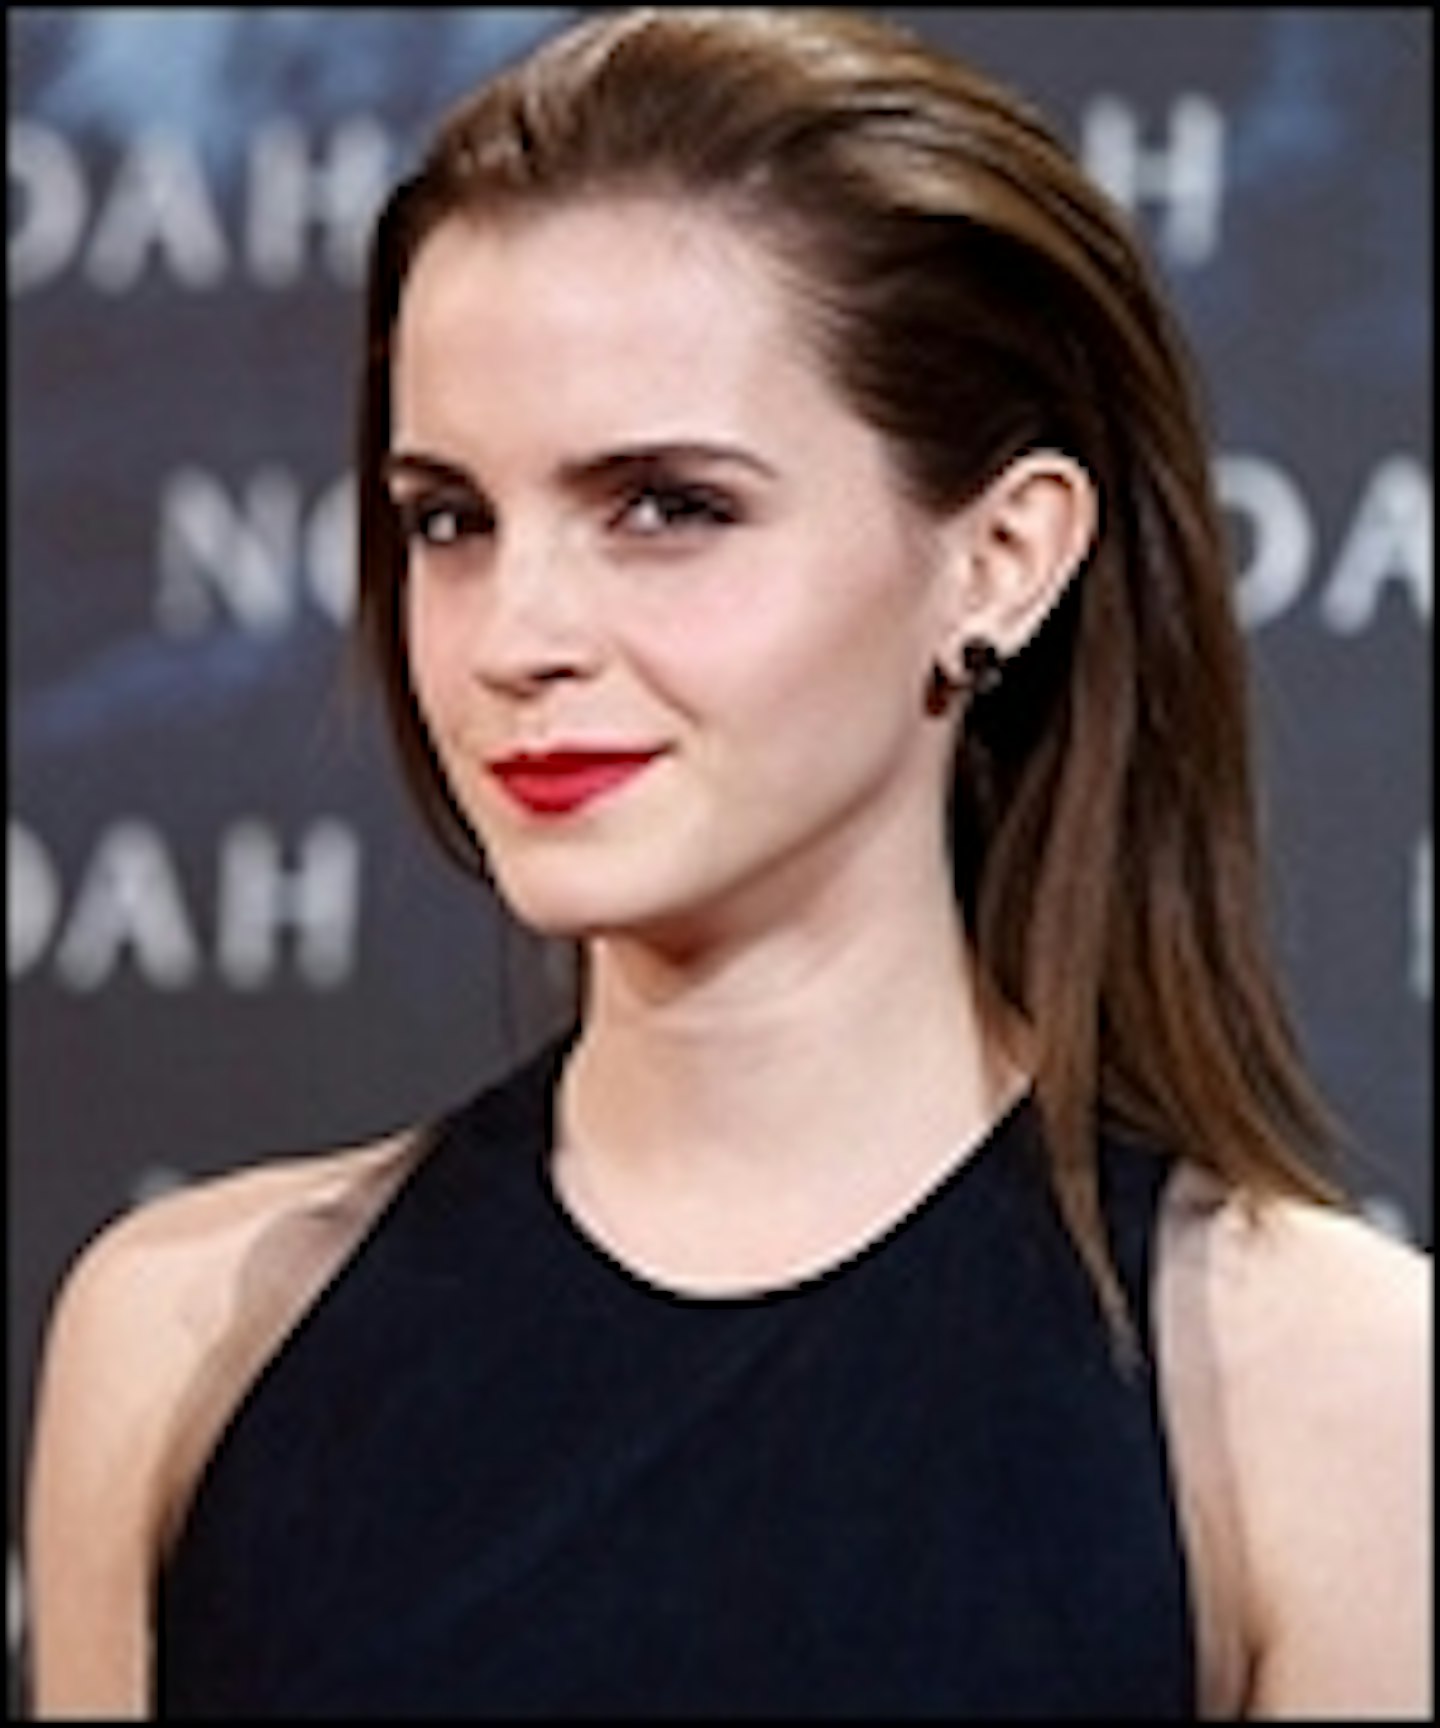 Emma Watson Signs For Beauty And The Beast